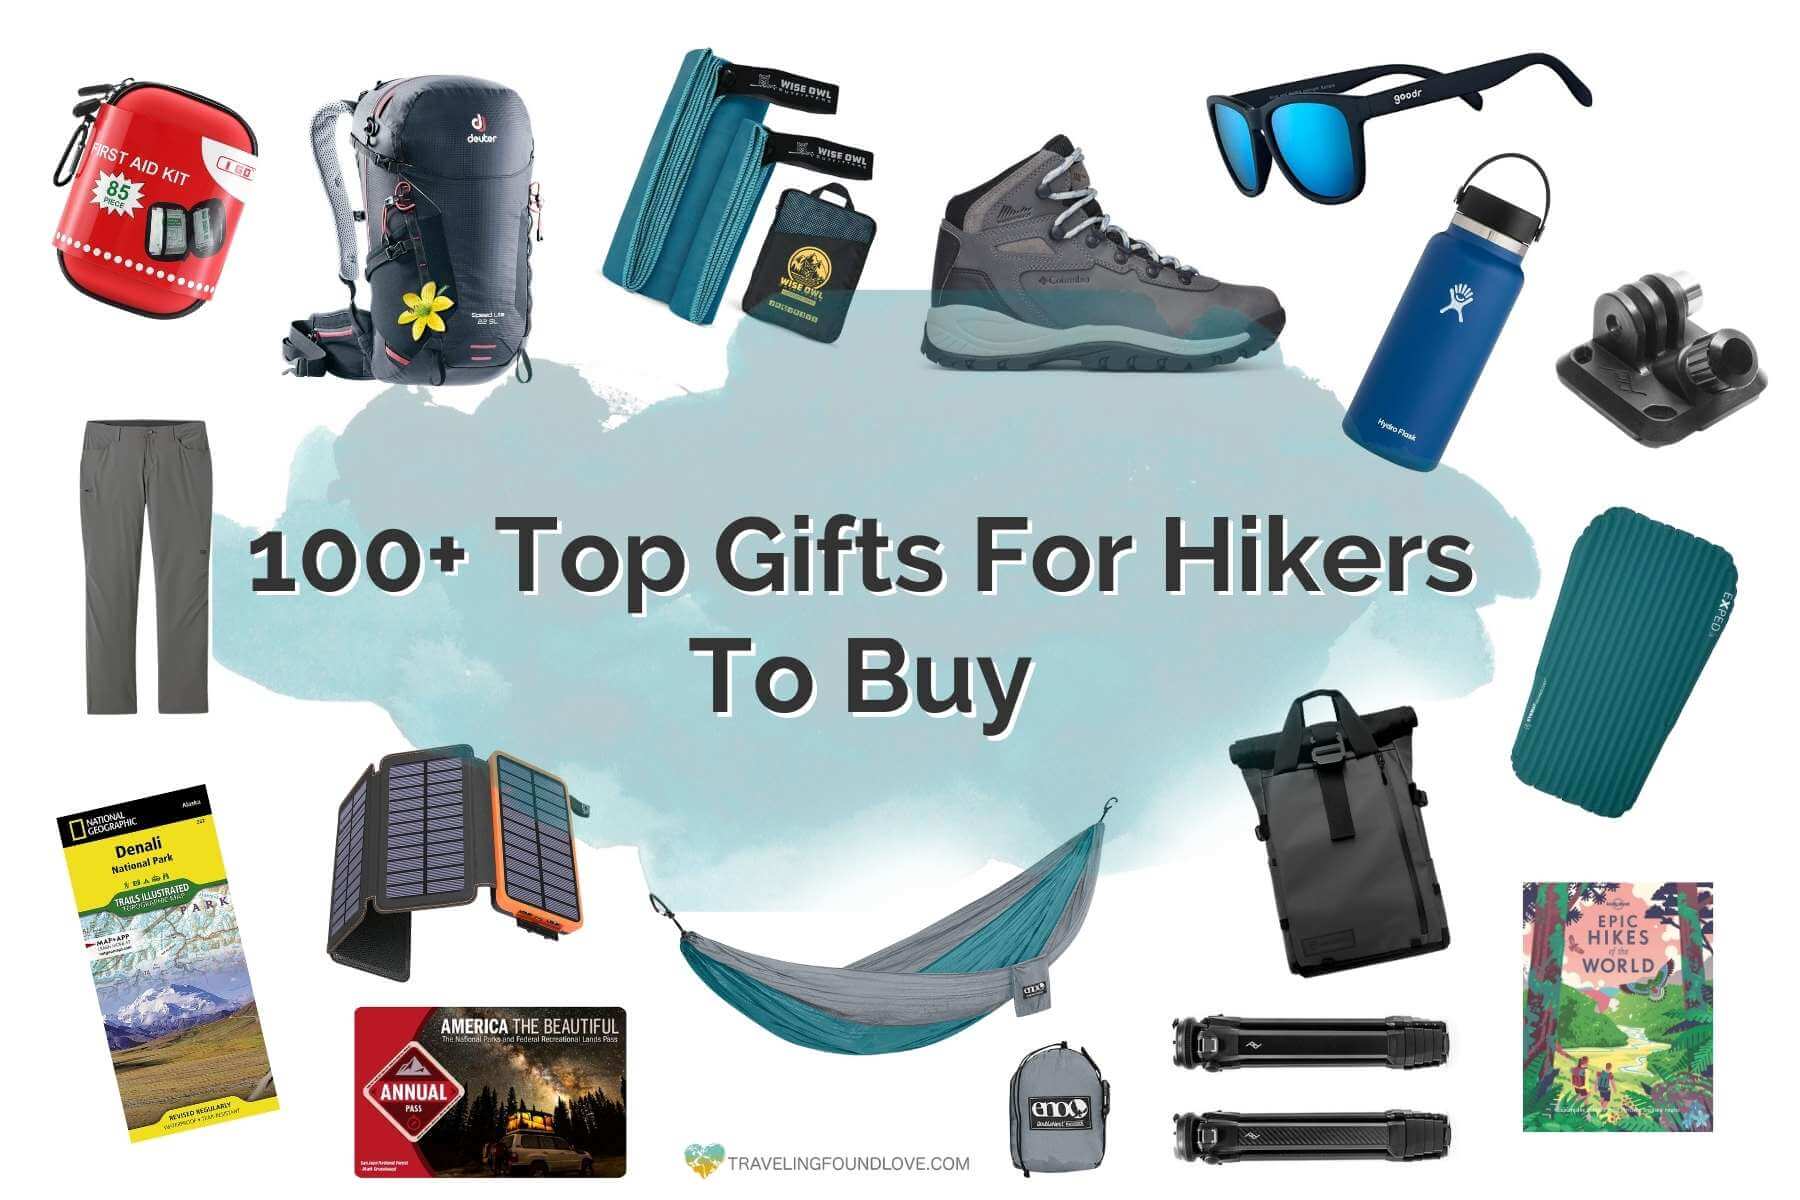 15 of the top gifts for hikers